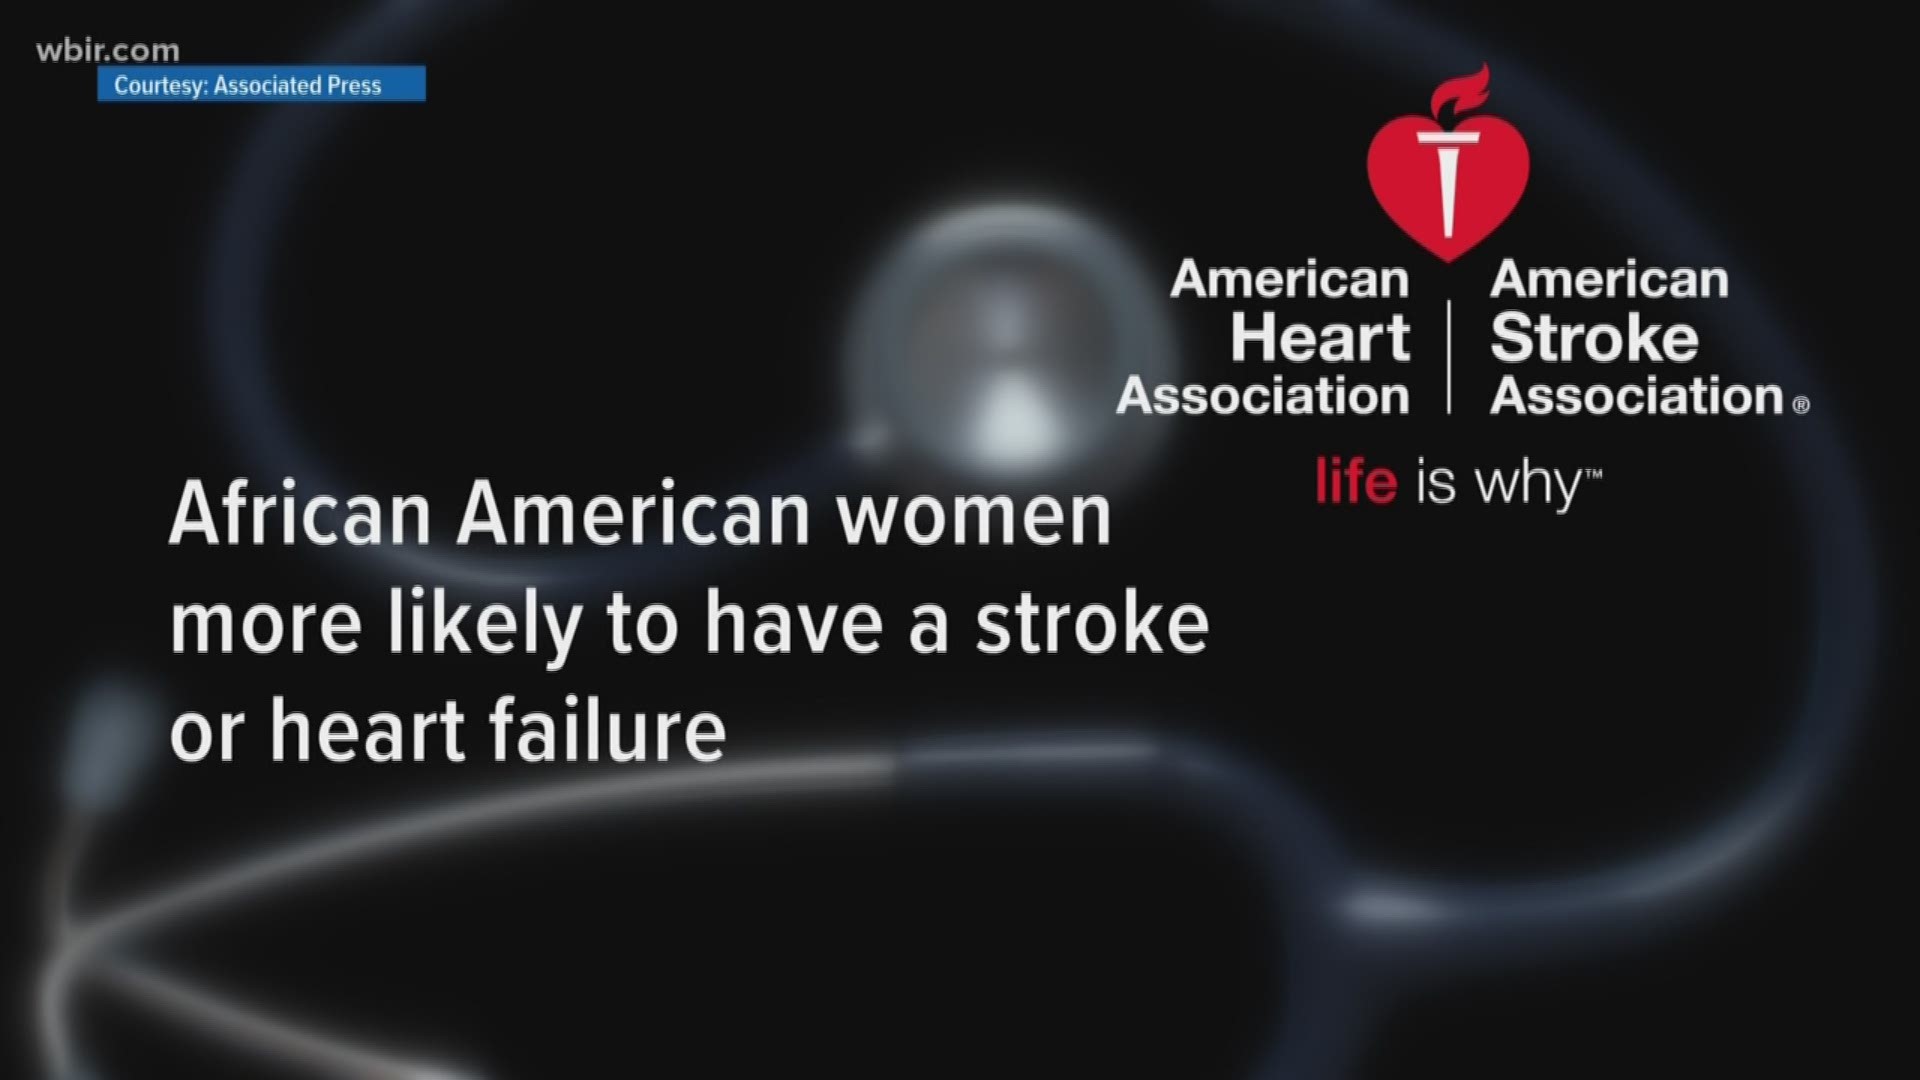 According to the Center for Disease Control, heart disease is the leading cause of death for women in the United States. But the American Heart Association says the rate is higher for African American women ages 20 and older.